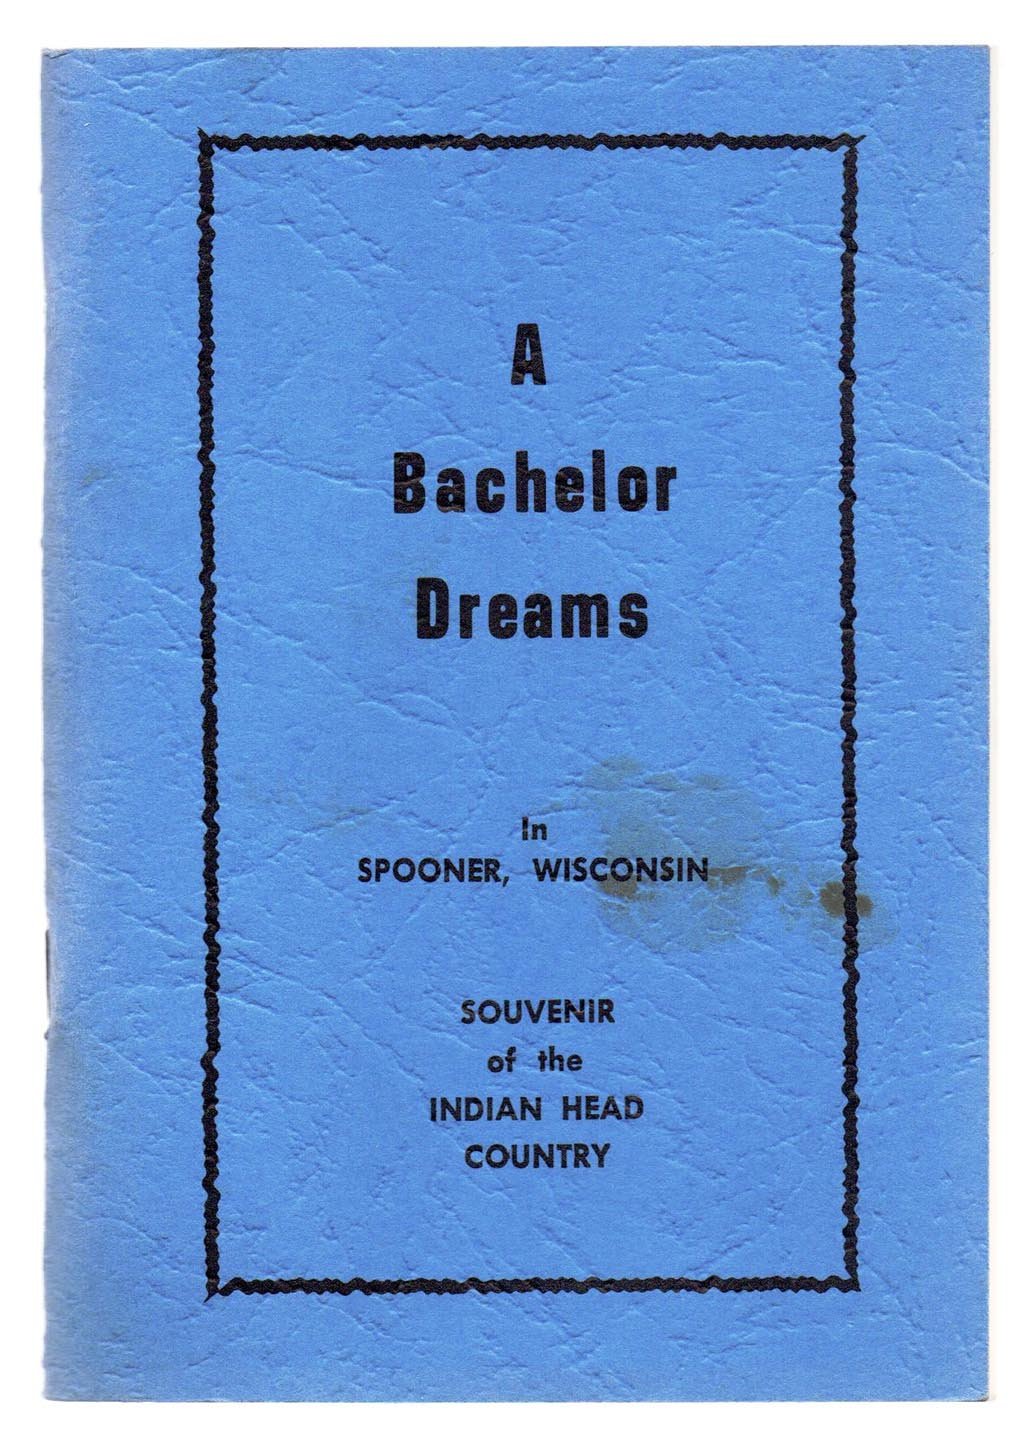 A Bachelor Dreams in Spooner, Wisconsin: Souvenir of the Indian Head Country